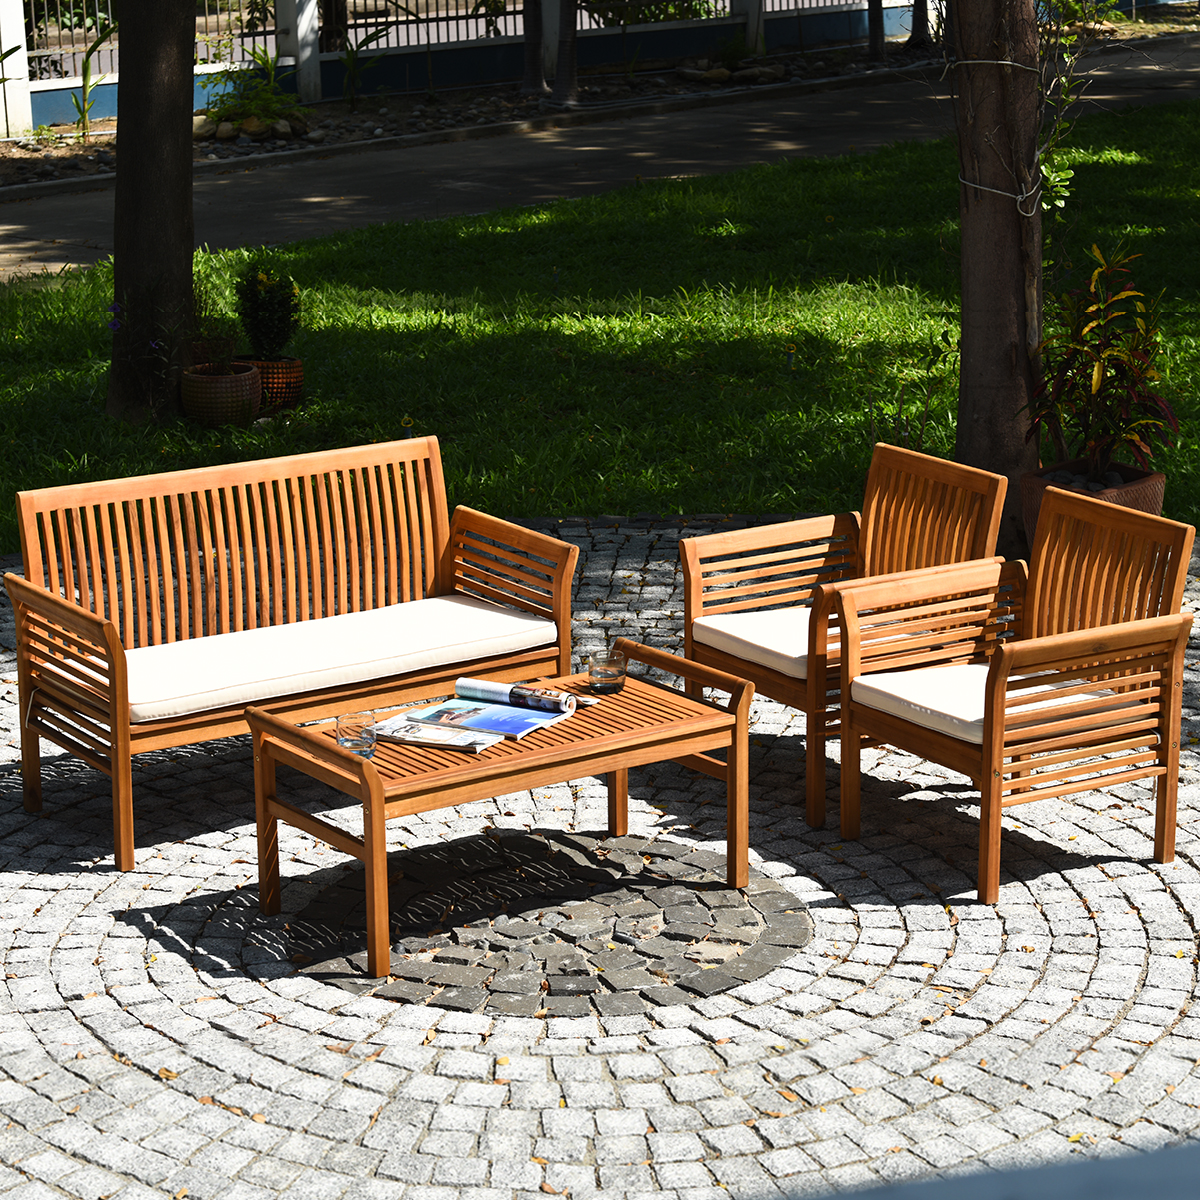 Costway 4 PCS Outdoor Acacia Wood Sofa Furniture Set Cushioned Chair Coffee Table Garden - image 5 of 10